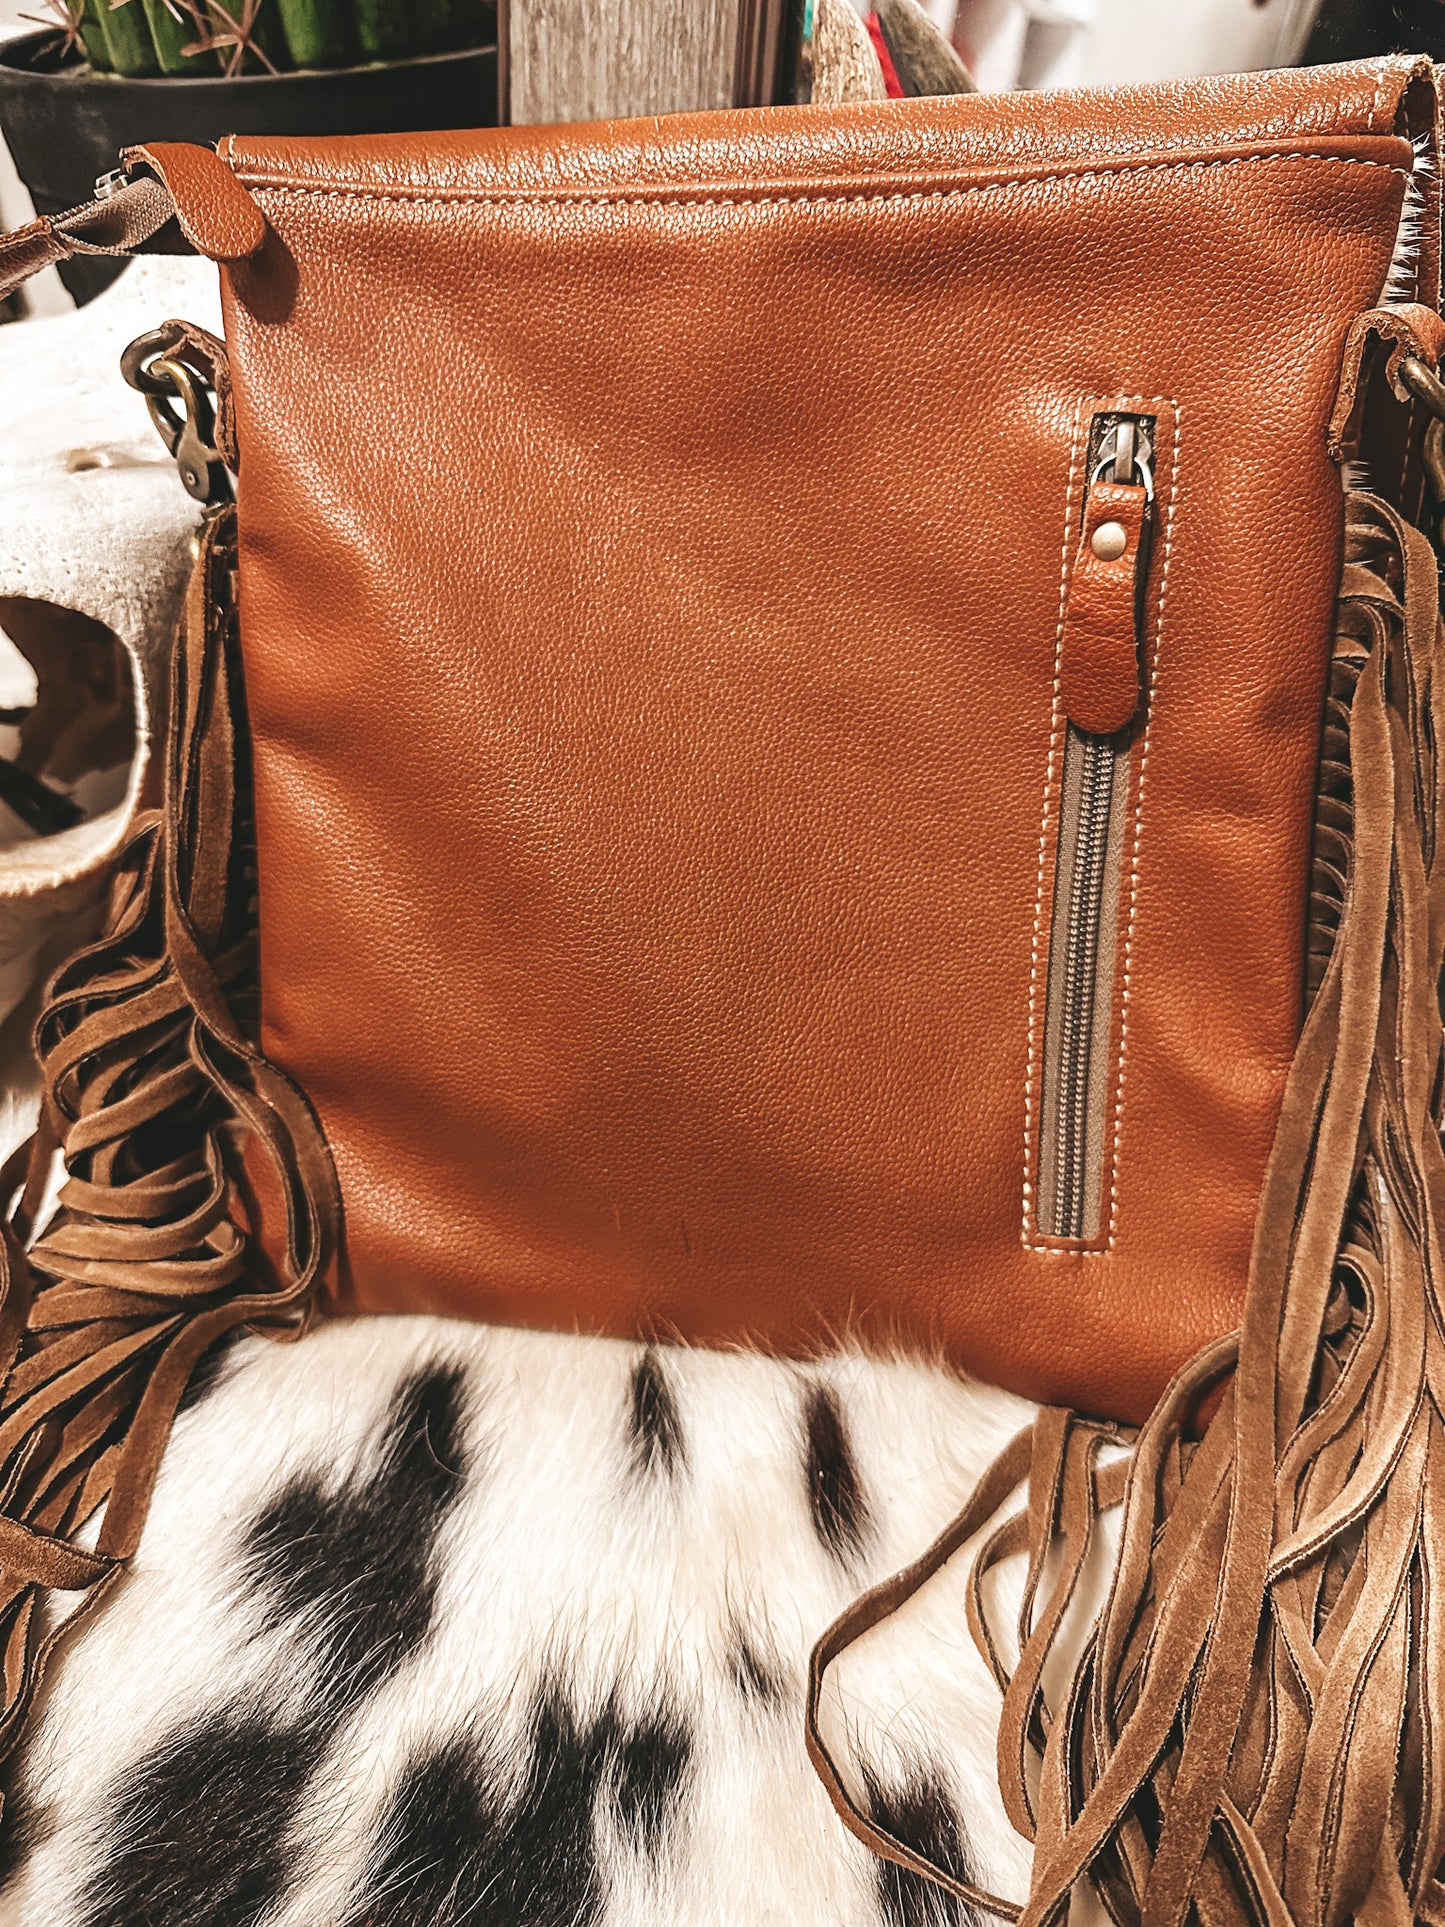 Banette Cowhide Leather Crossbody